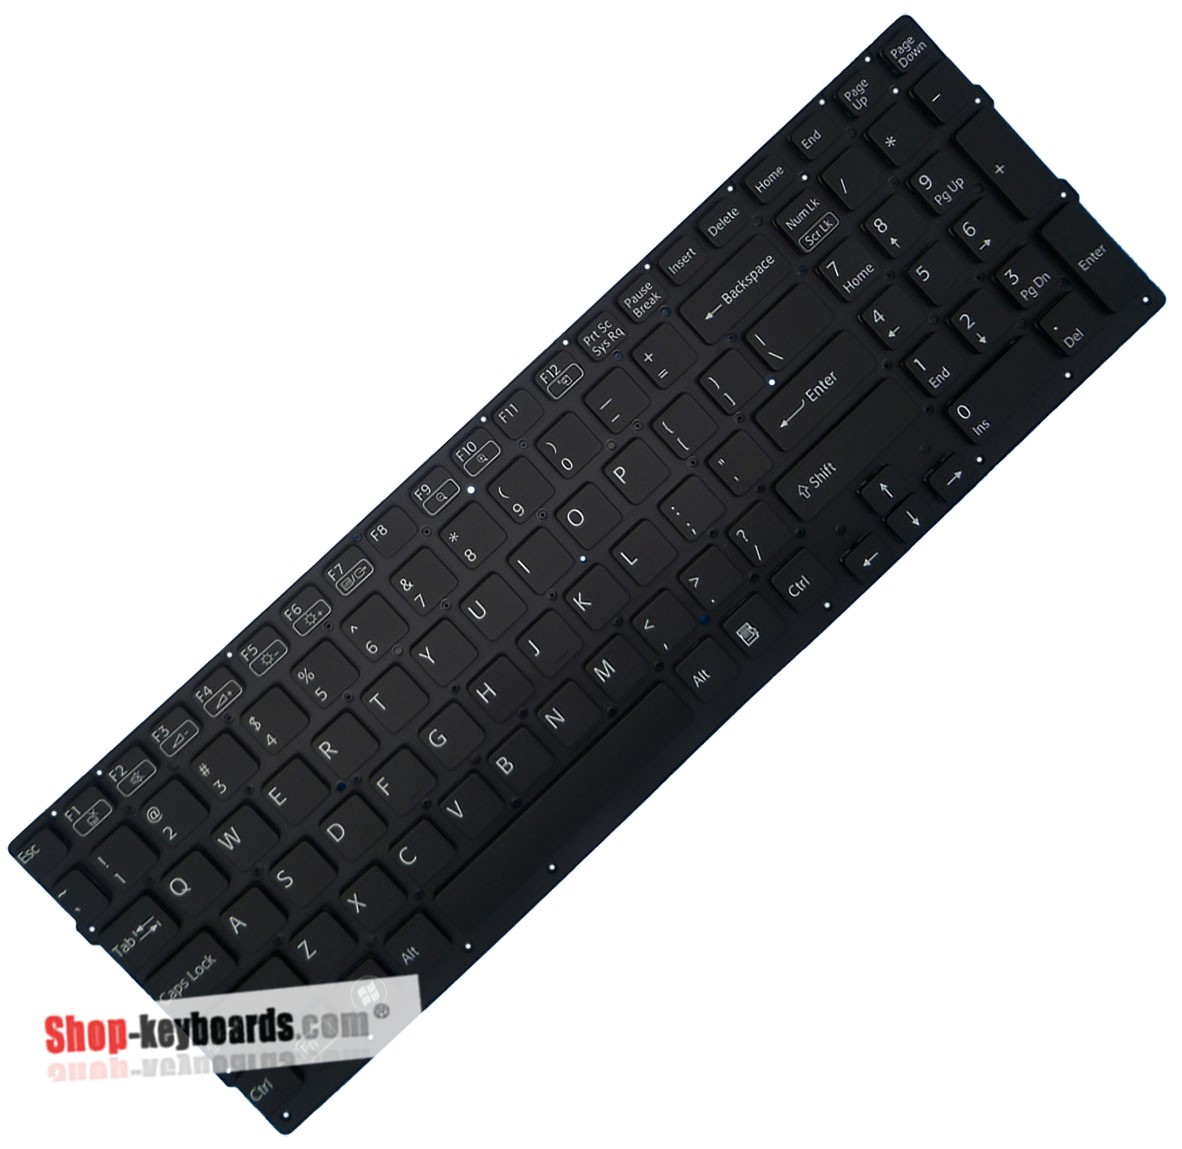 Sony VAIO VPC-CB17EC Keyboard replacement